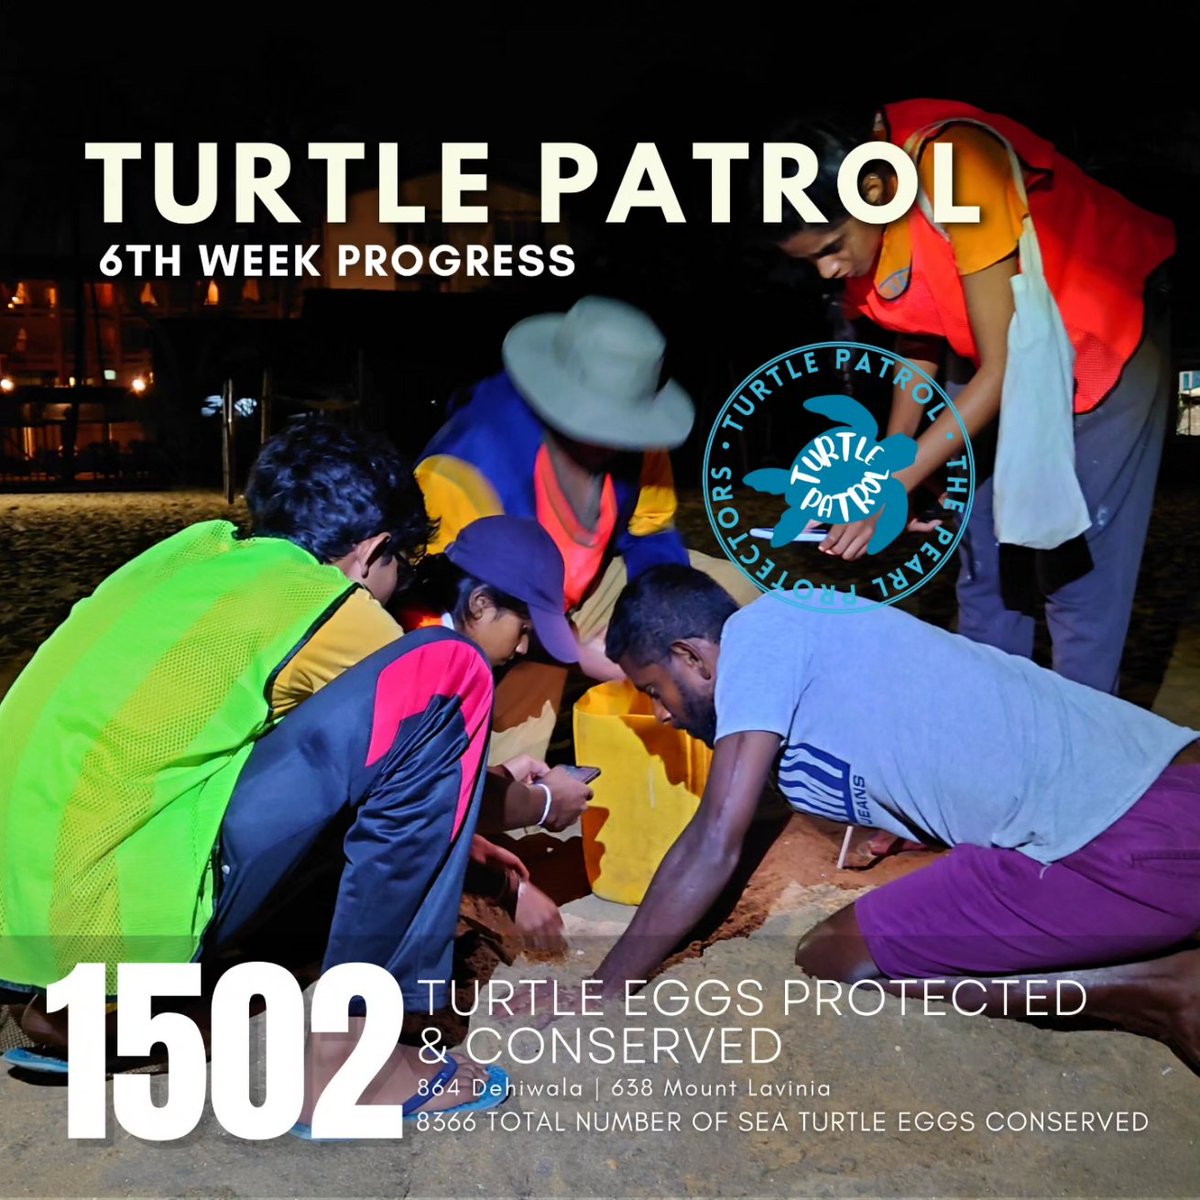 Turtle Patrol steps into it's 6th week of Patrolling 1502 turtle eggs were #exsitu conserved in Mt Lavinia & Dehiwala. These beaches are one of the only few urban beaches globally where sea turtles nest During the total patrolling duration, 8366 eggs have been conserved